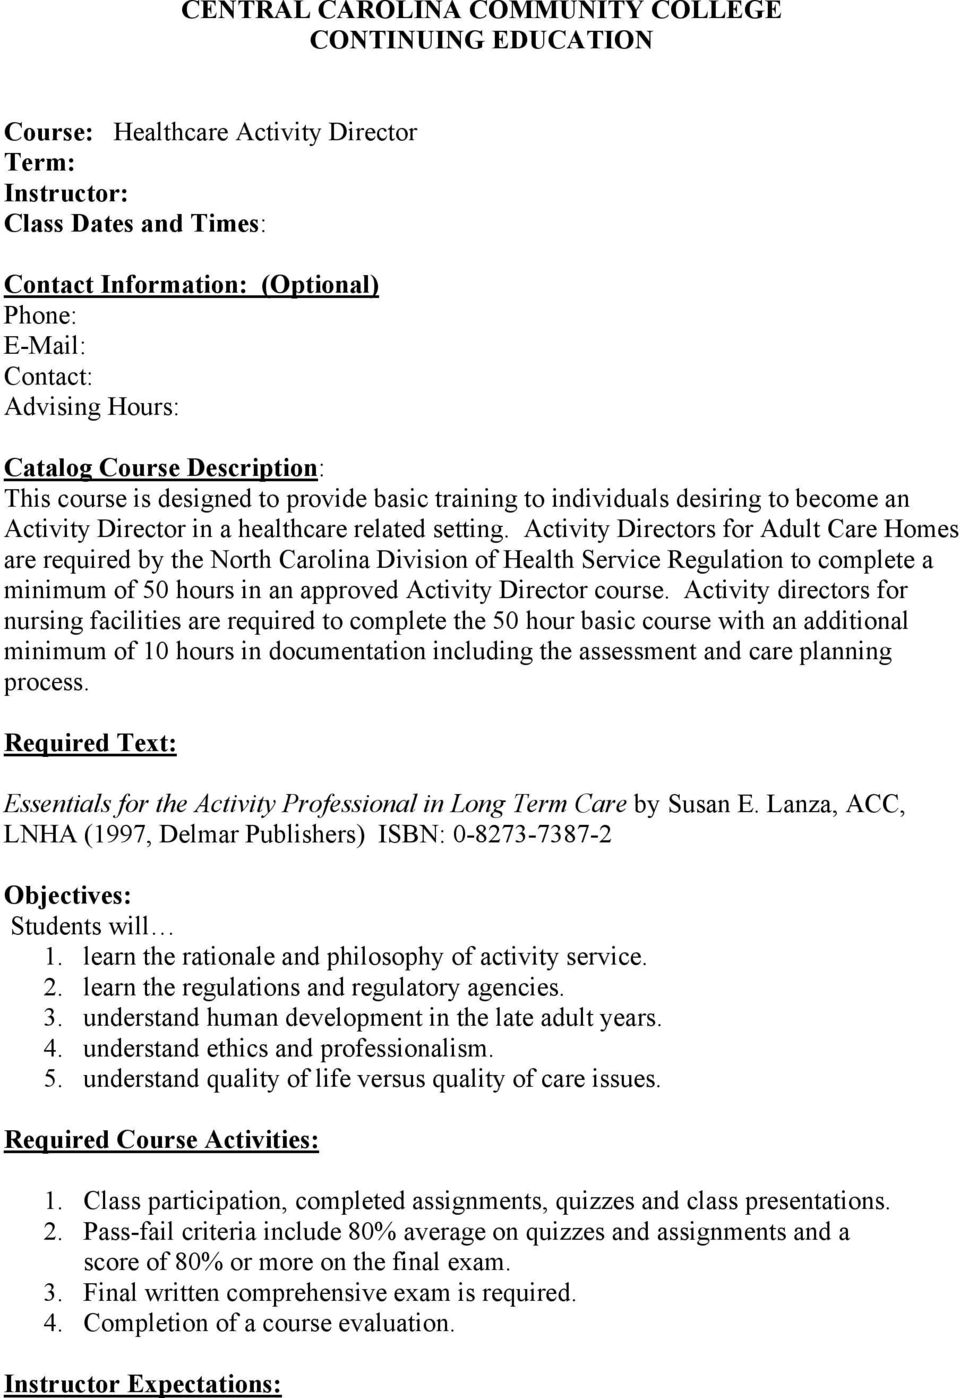 Activity Directors for Adult Care Homes are required by the North Carolina Division of Health Service Regulation to complete a minimum of 50 hours in an approved Activity Director course.